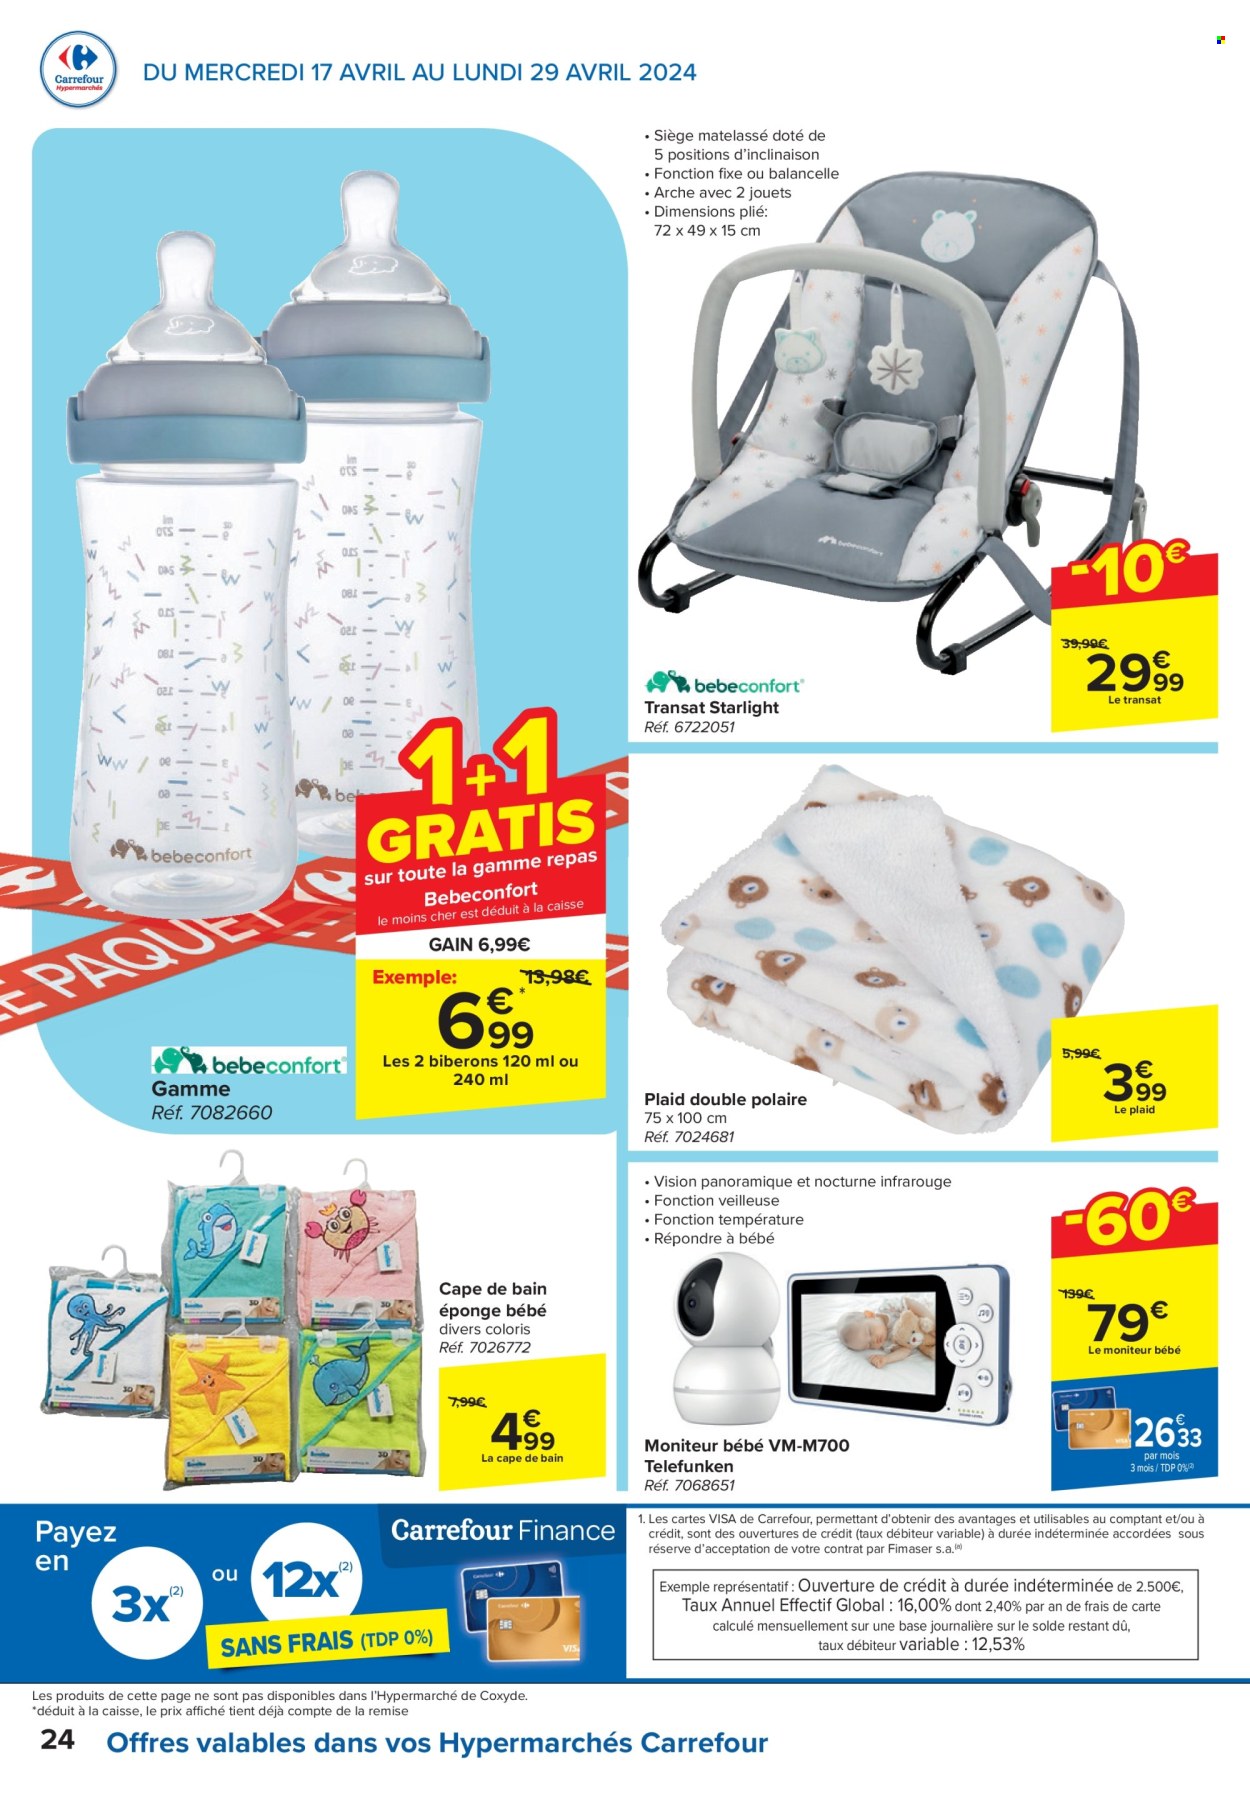 Catalogue Carrefour hypermarkt - 17.4.2024 - 29.4.2024. Page 24.